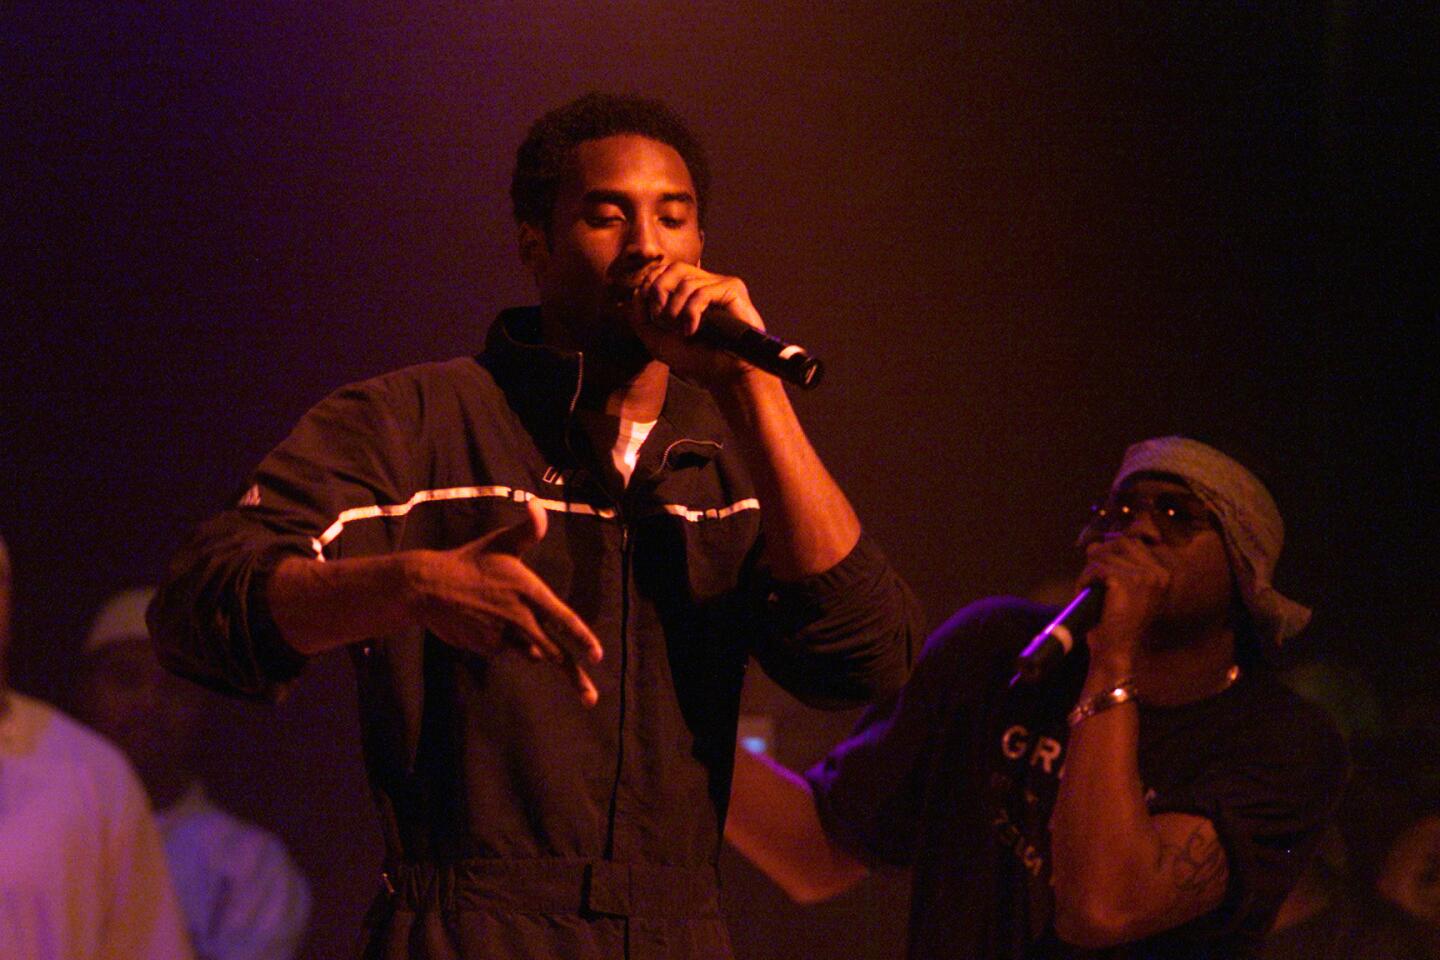 Kobe Bryant raps on stage in 2000 at the House of Blues in West Hollywood.